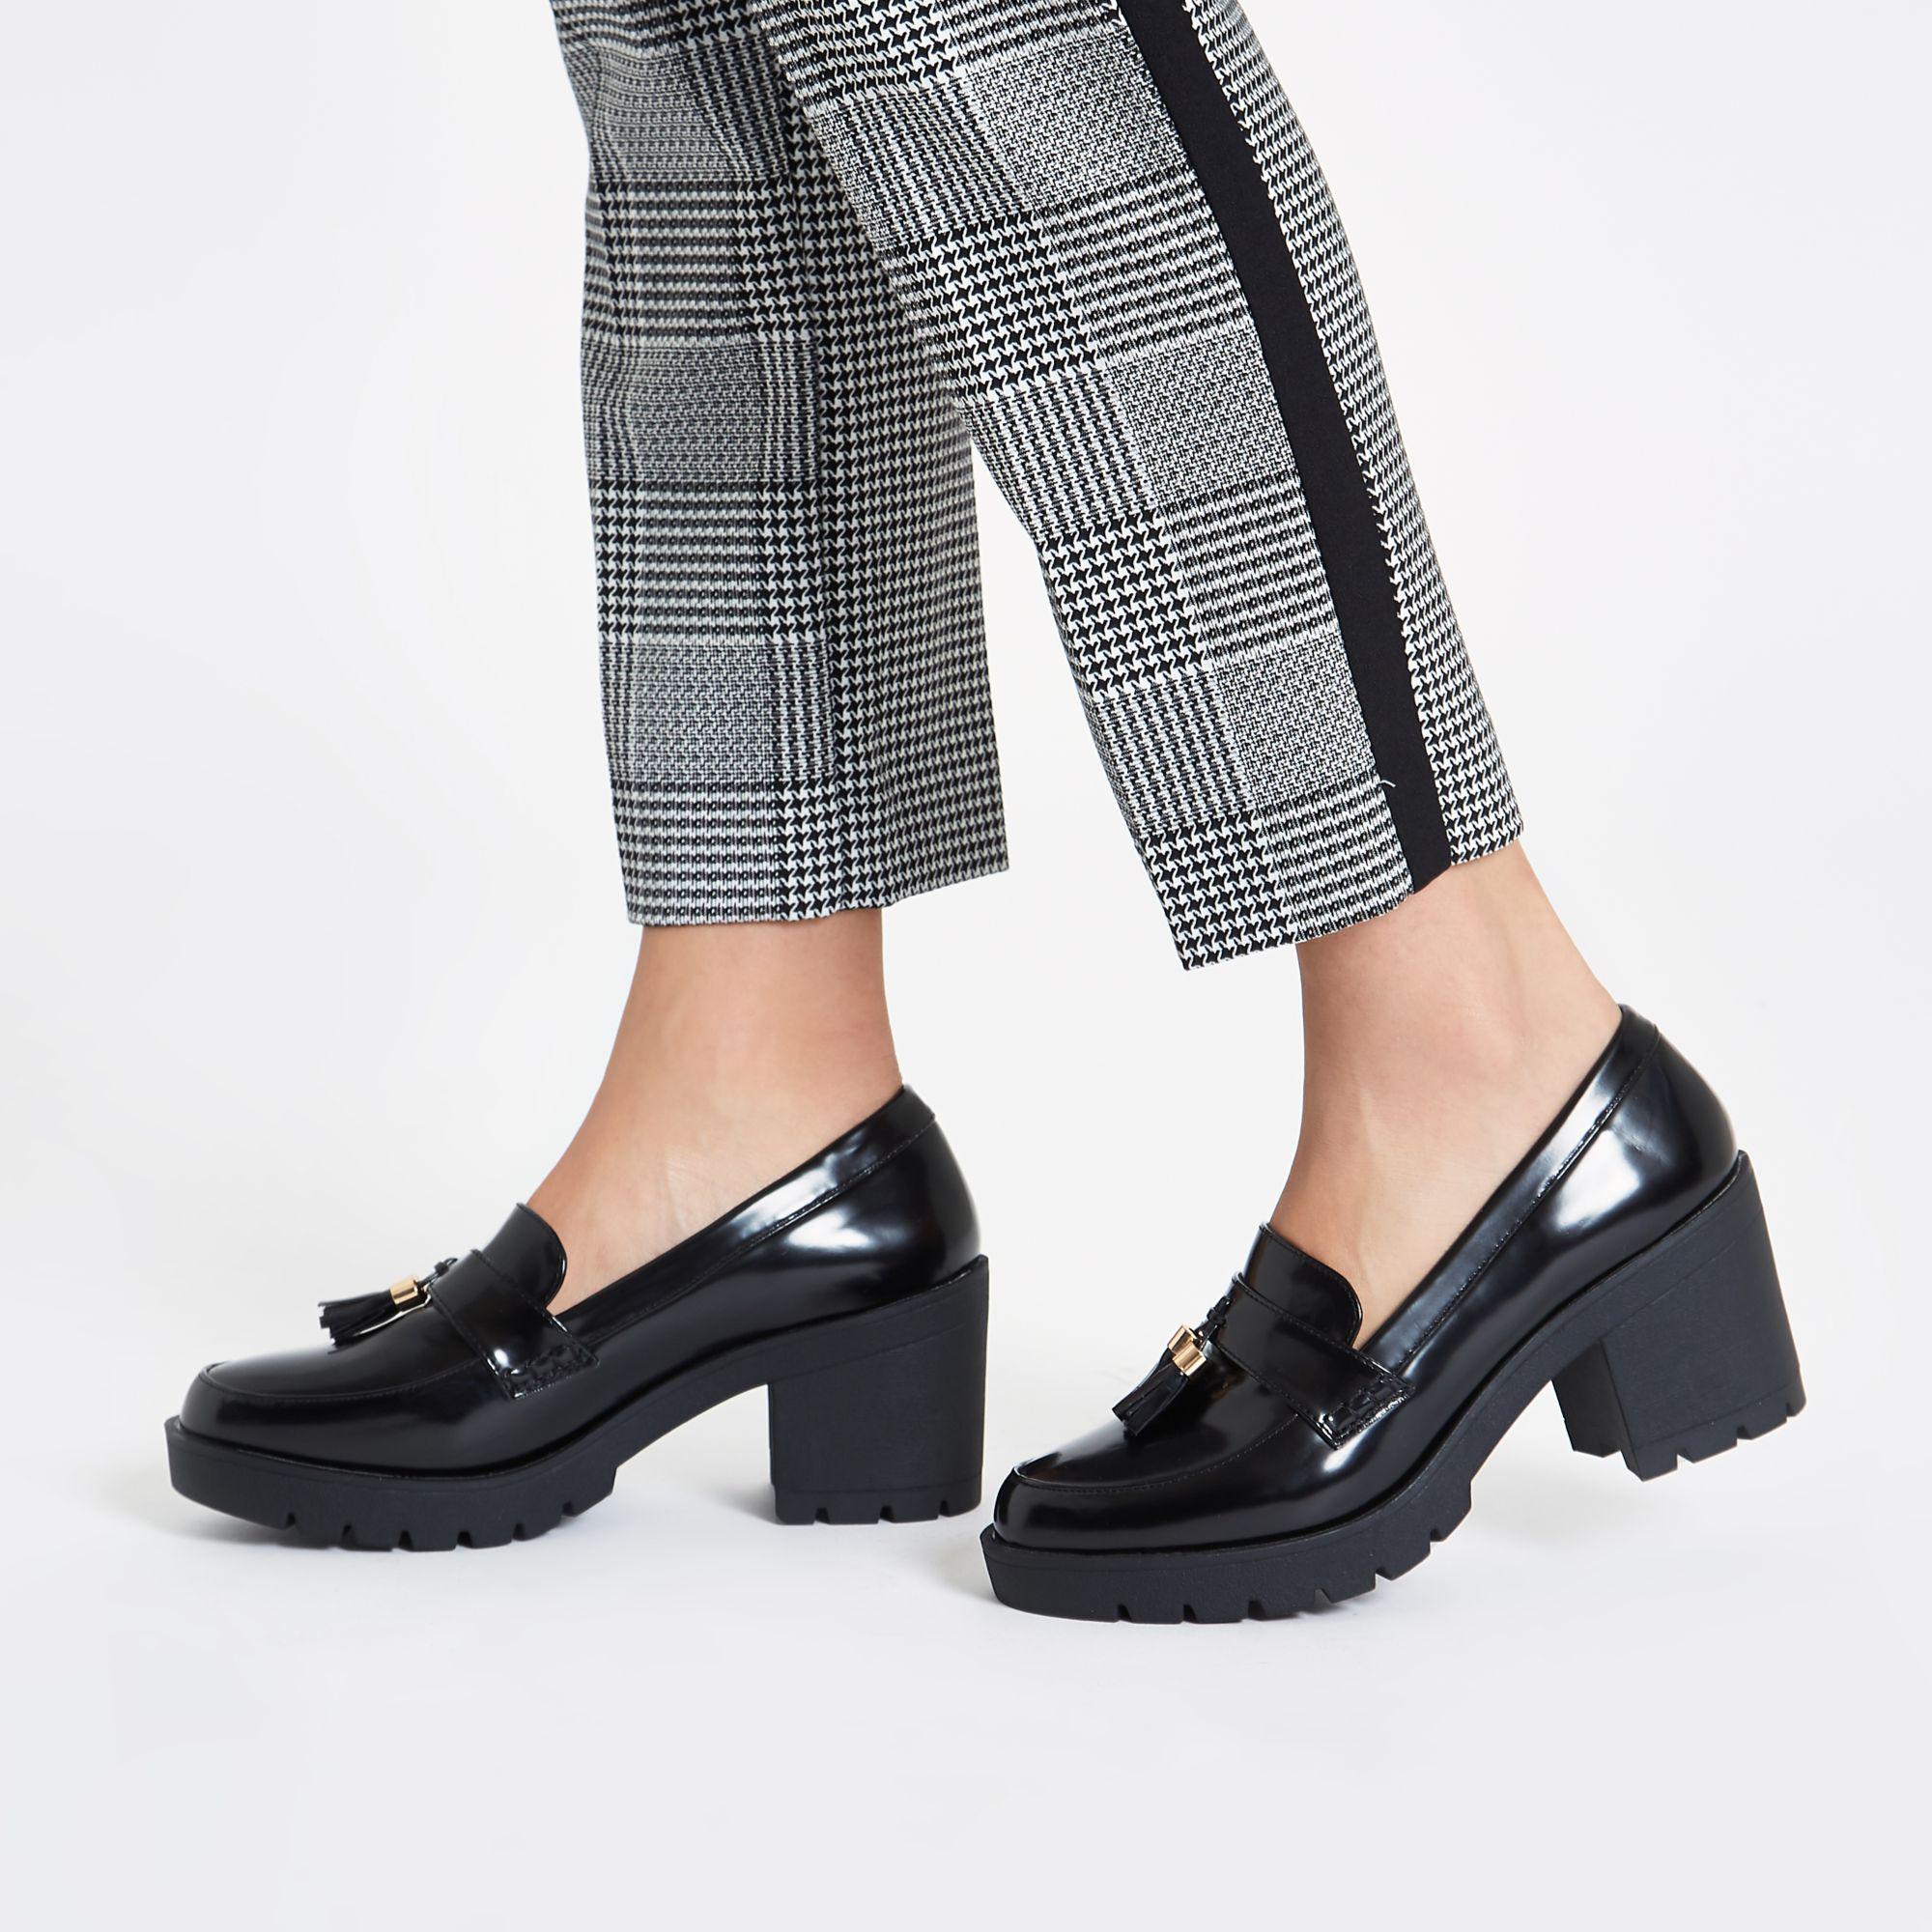 Buy > chunky loafer heels > in stock